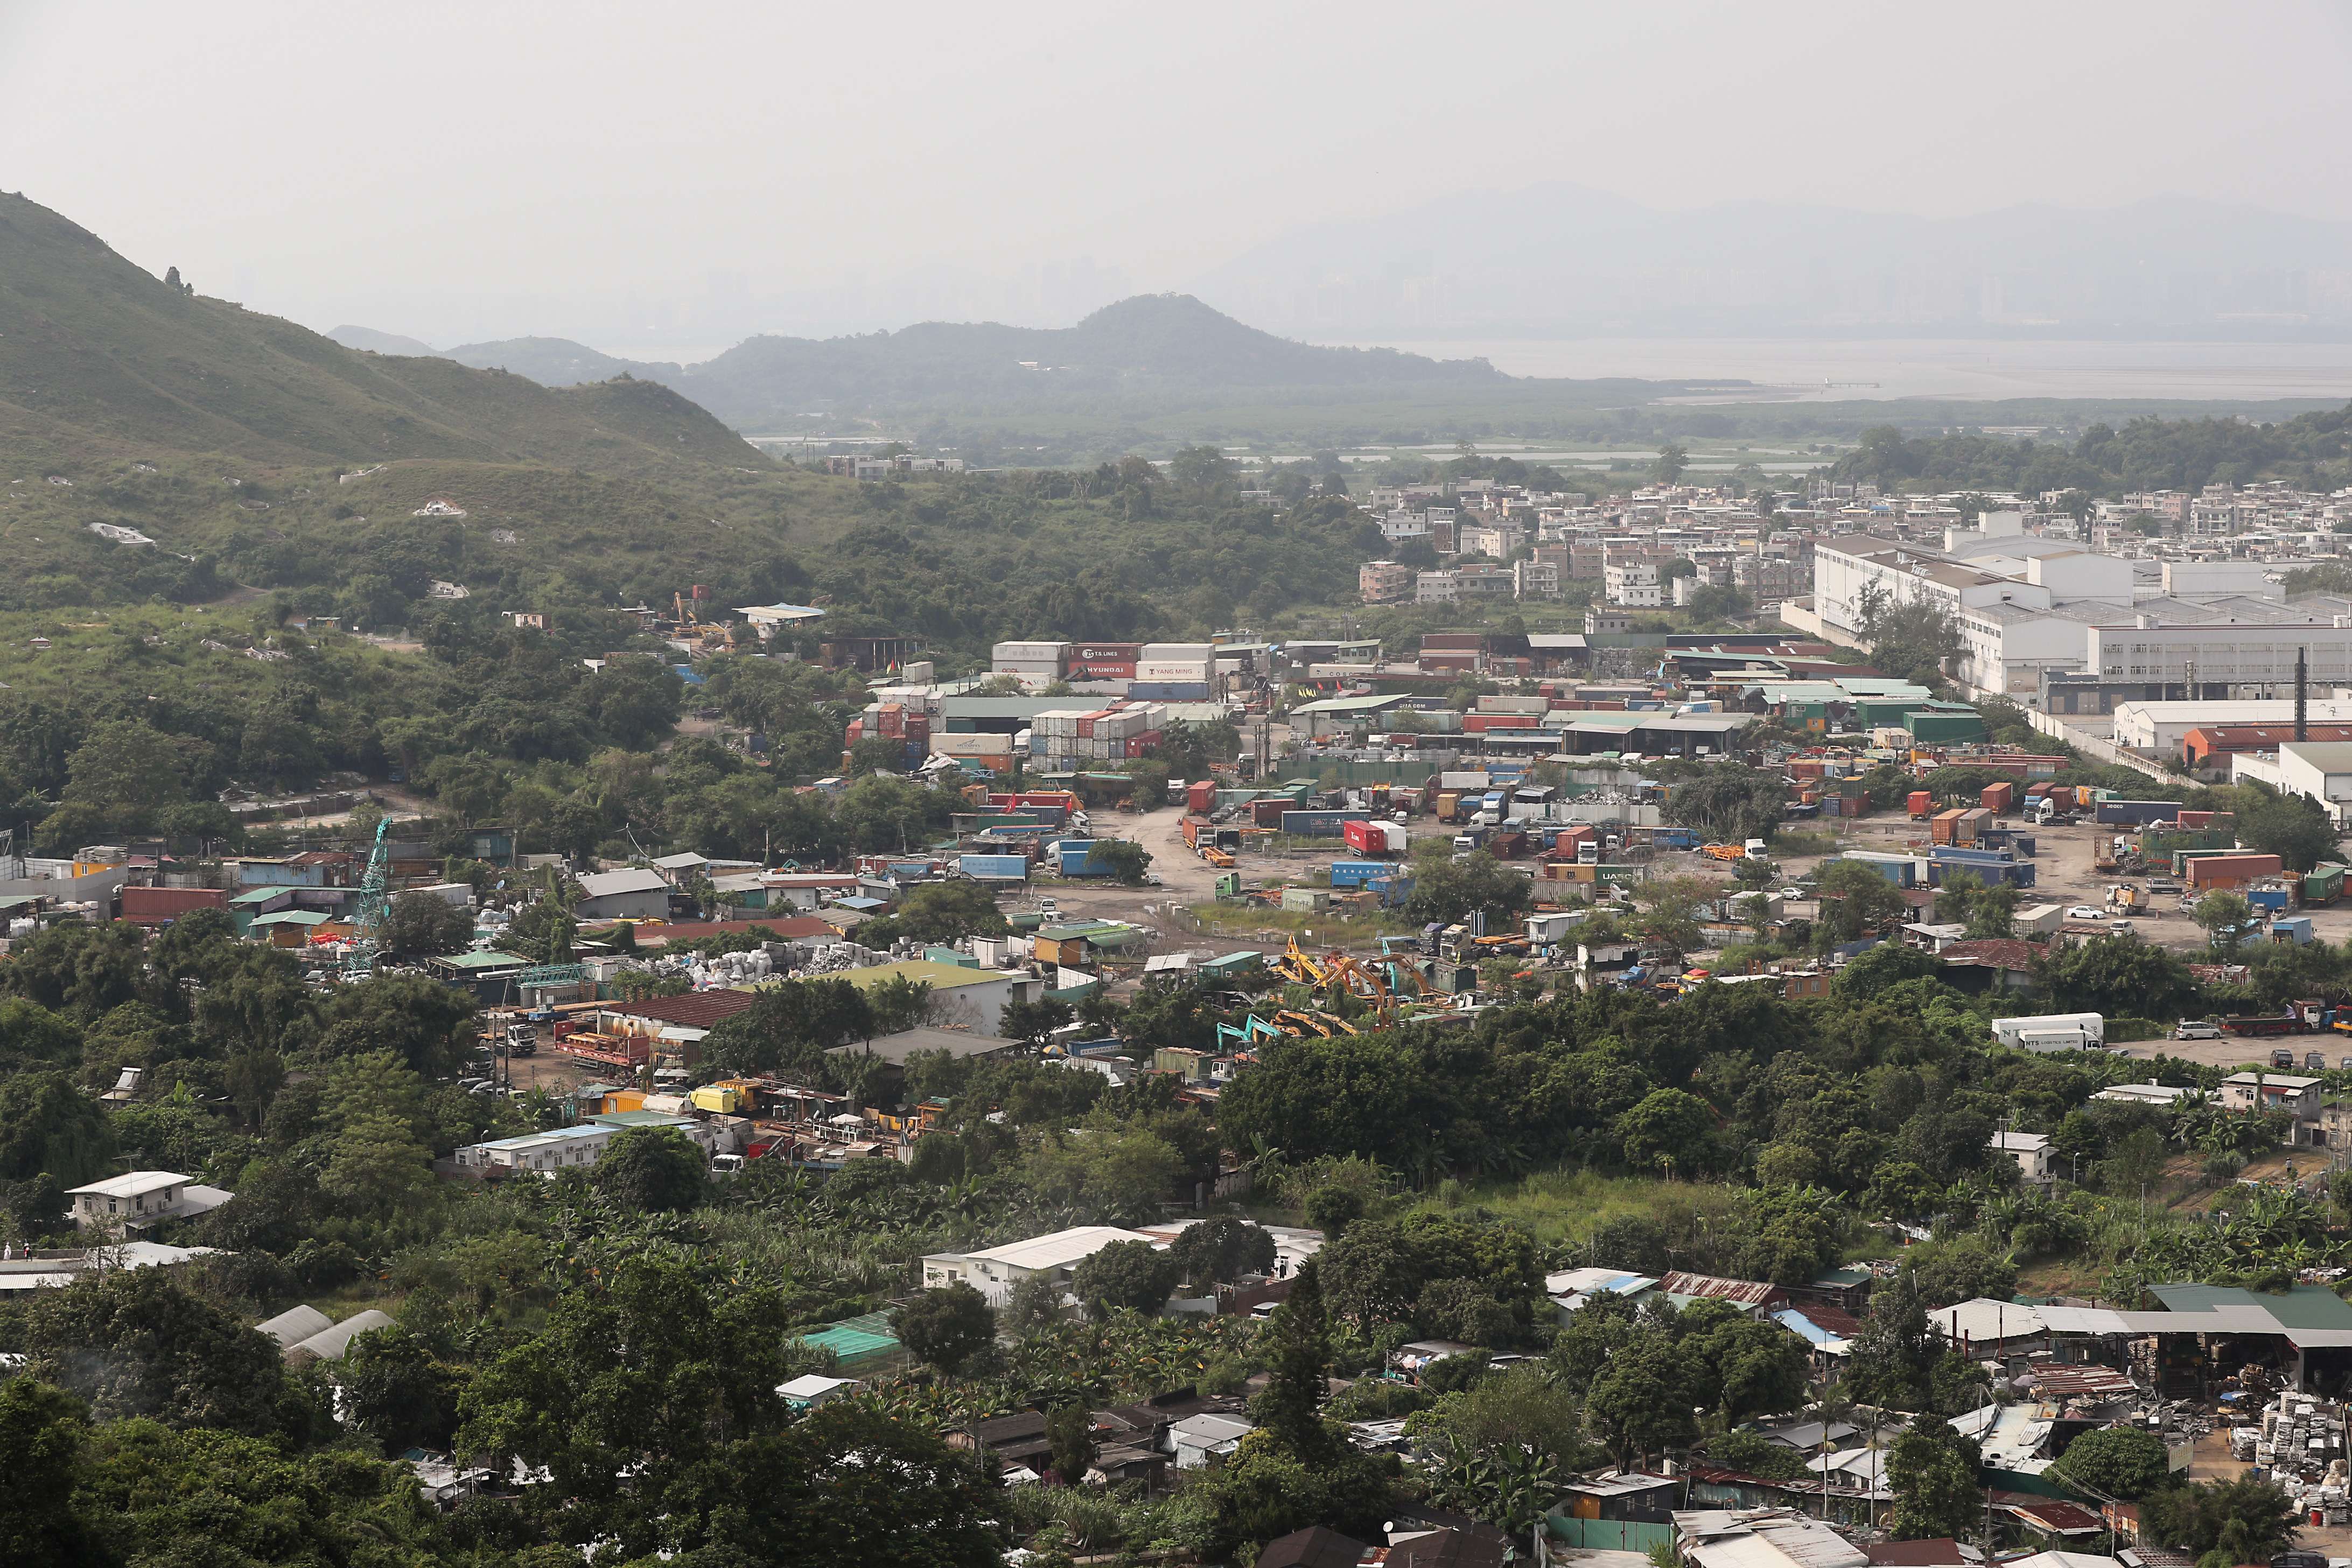 The project on the brownfield site in Wang Chau was dropped after opposition from rural leaders. Photo: Edward Wong